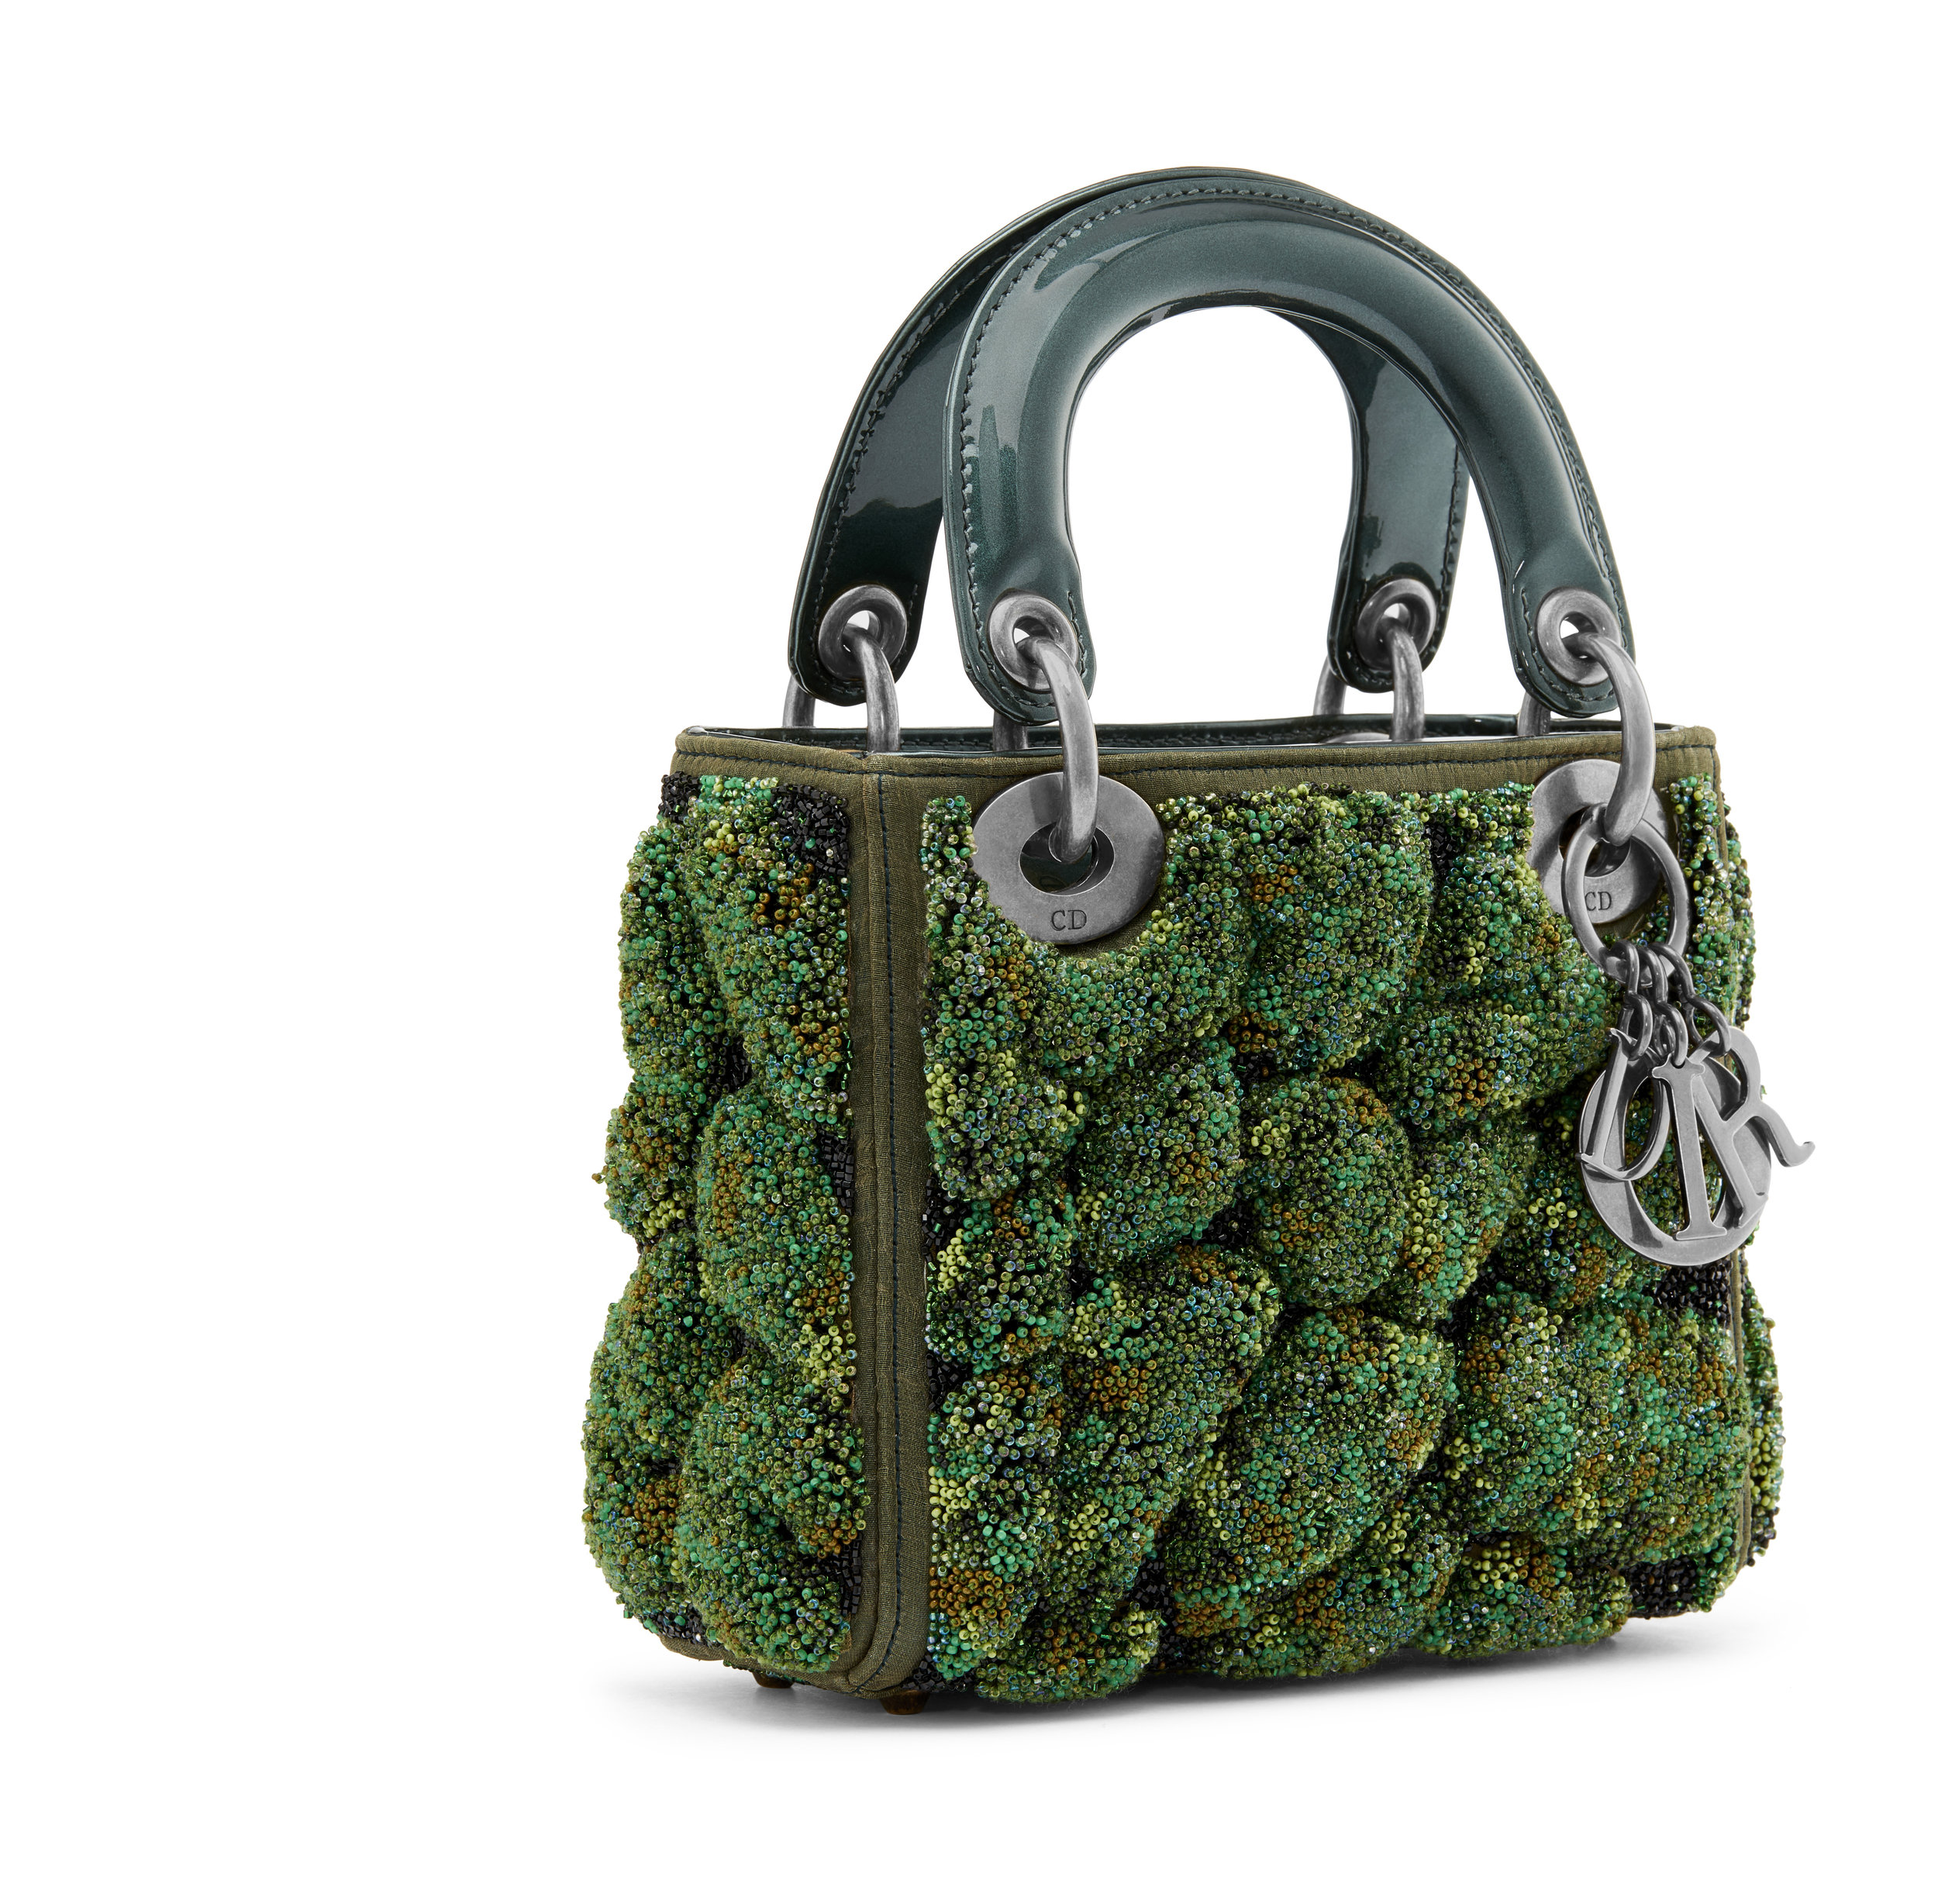 Watch 11 global artists turn the Lady Dior bag into distinctive art pieces